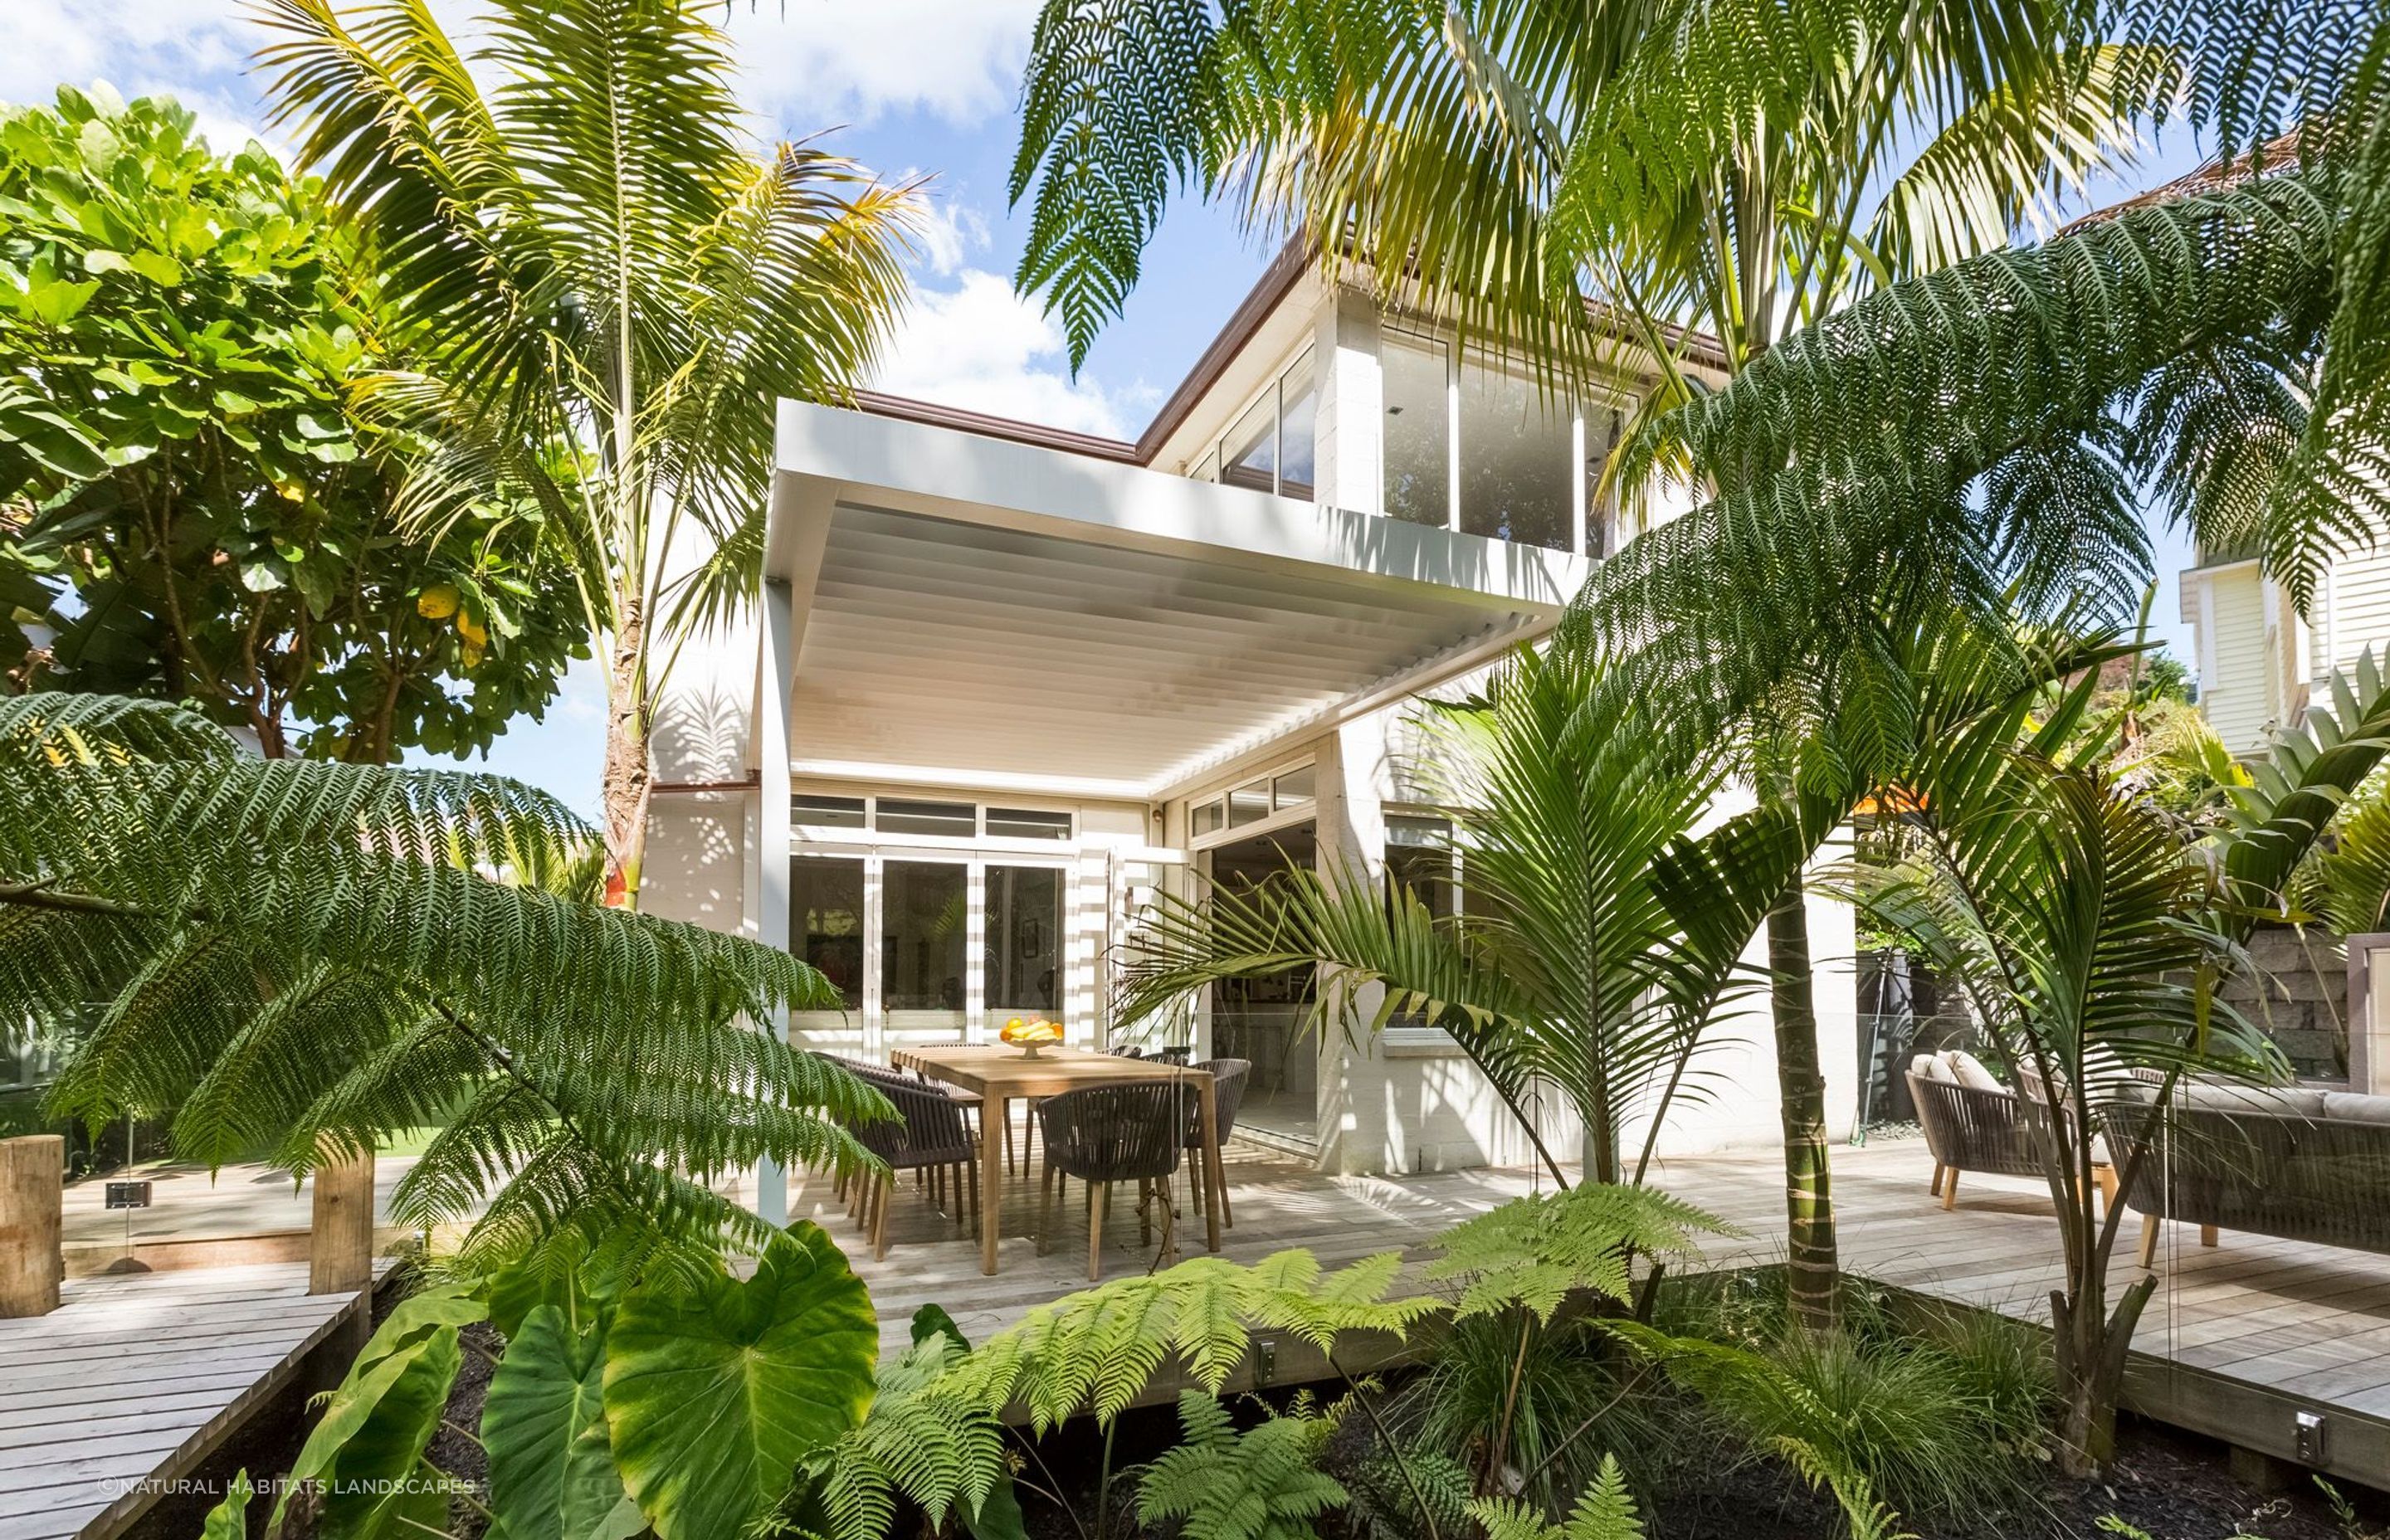 An exotic ambience that transports you away, helped by some tropical plants in this Remuera home.